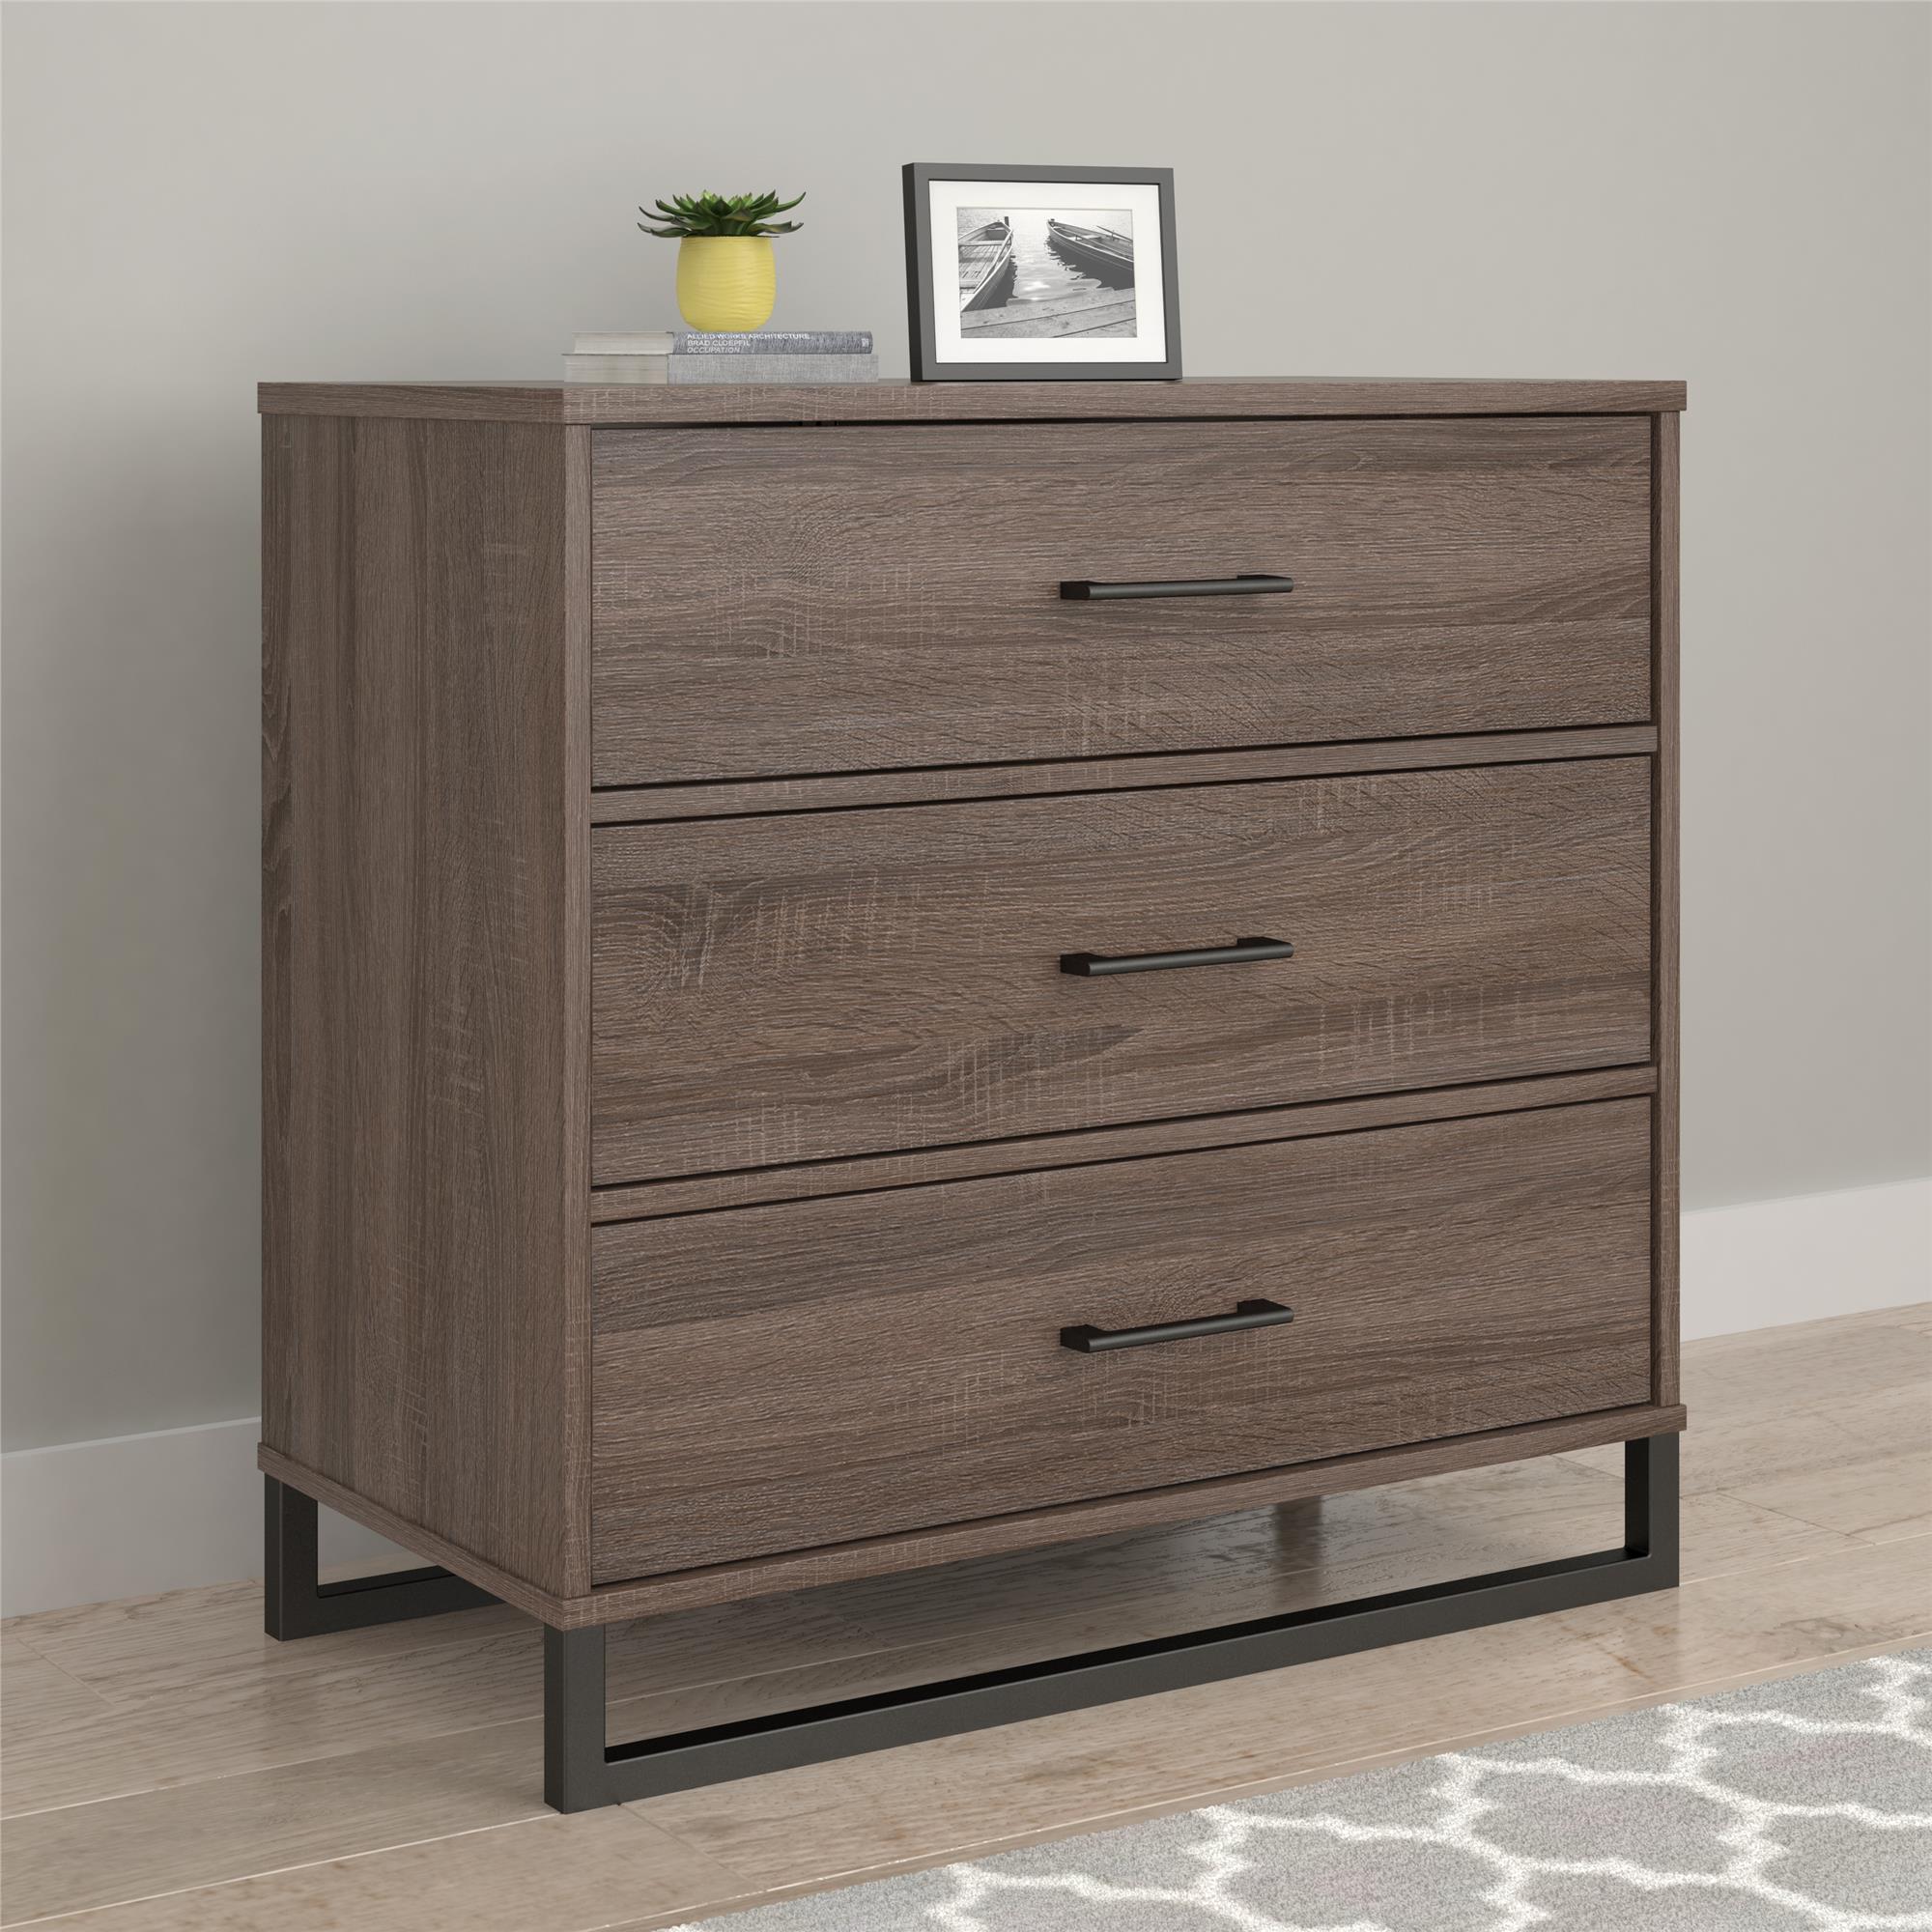 ameriwood furniture mixed material drawer dresser sonoma oak source room essentials accent table tall bedside drawers mid century dining chairs coffee tray ideas victorian living